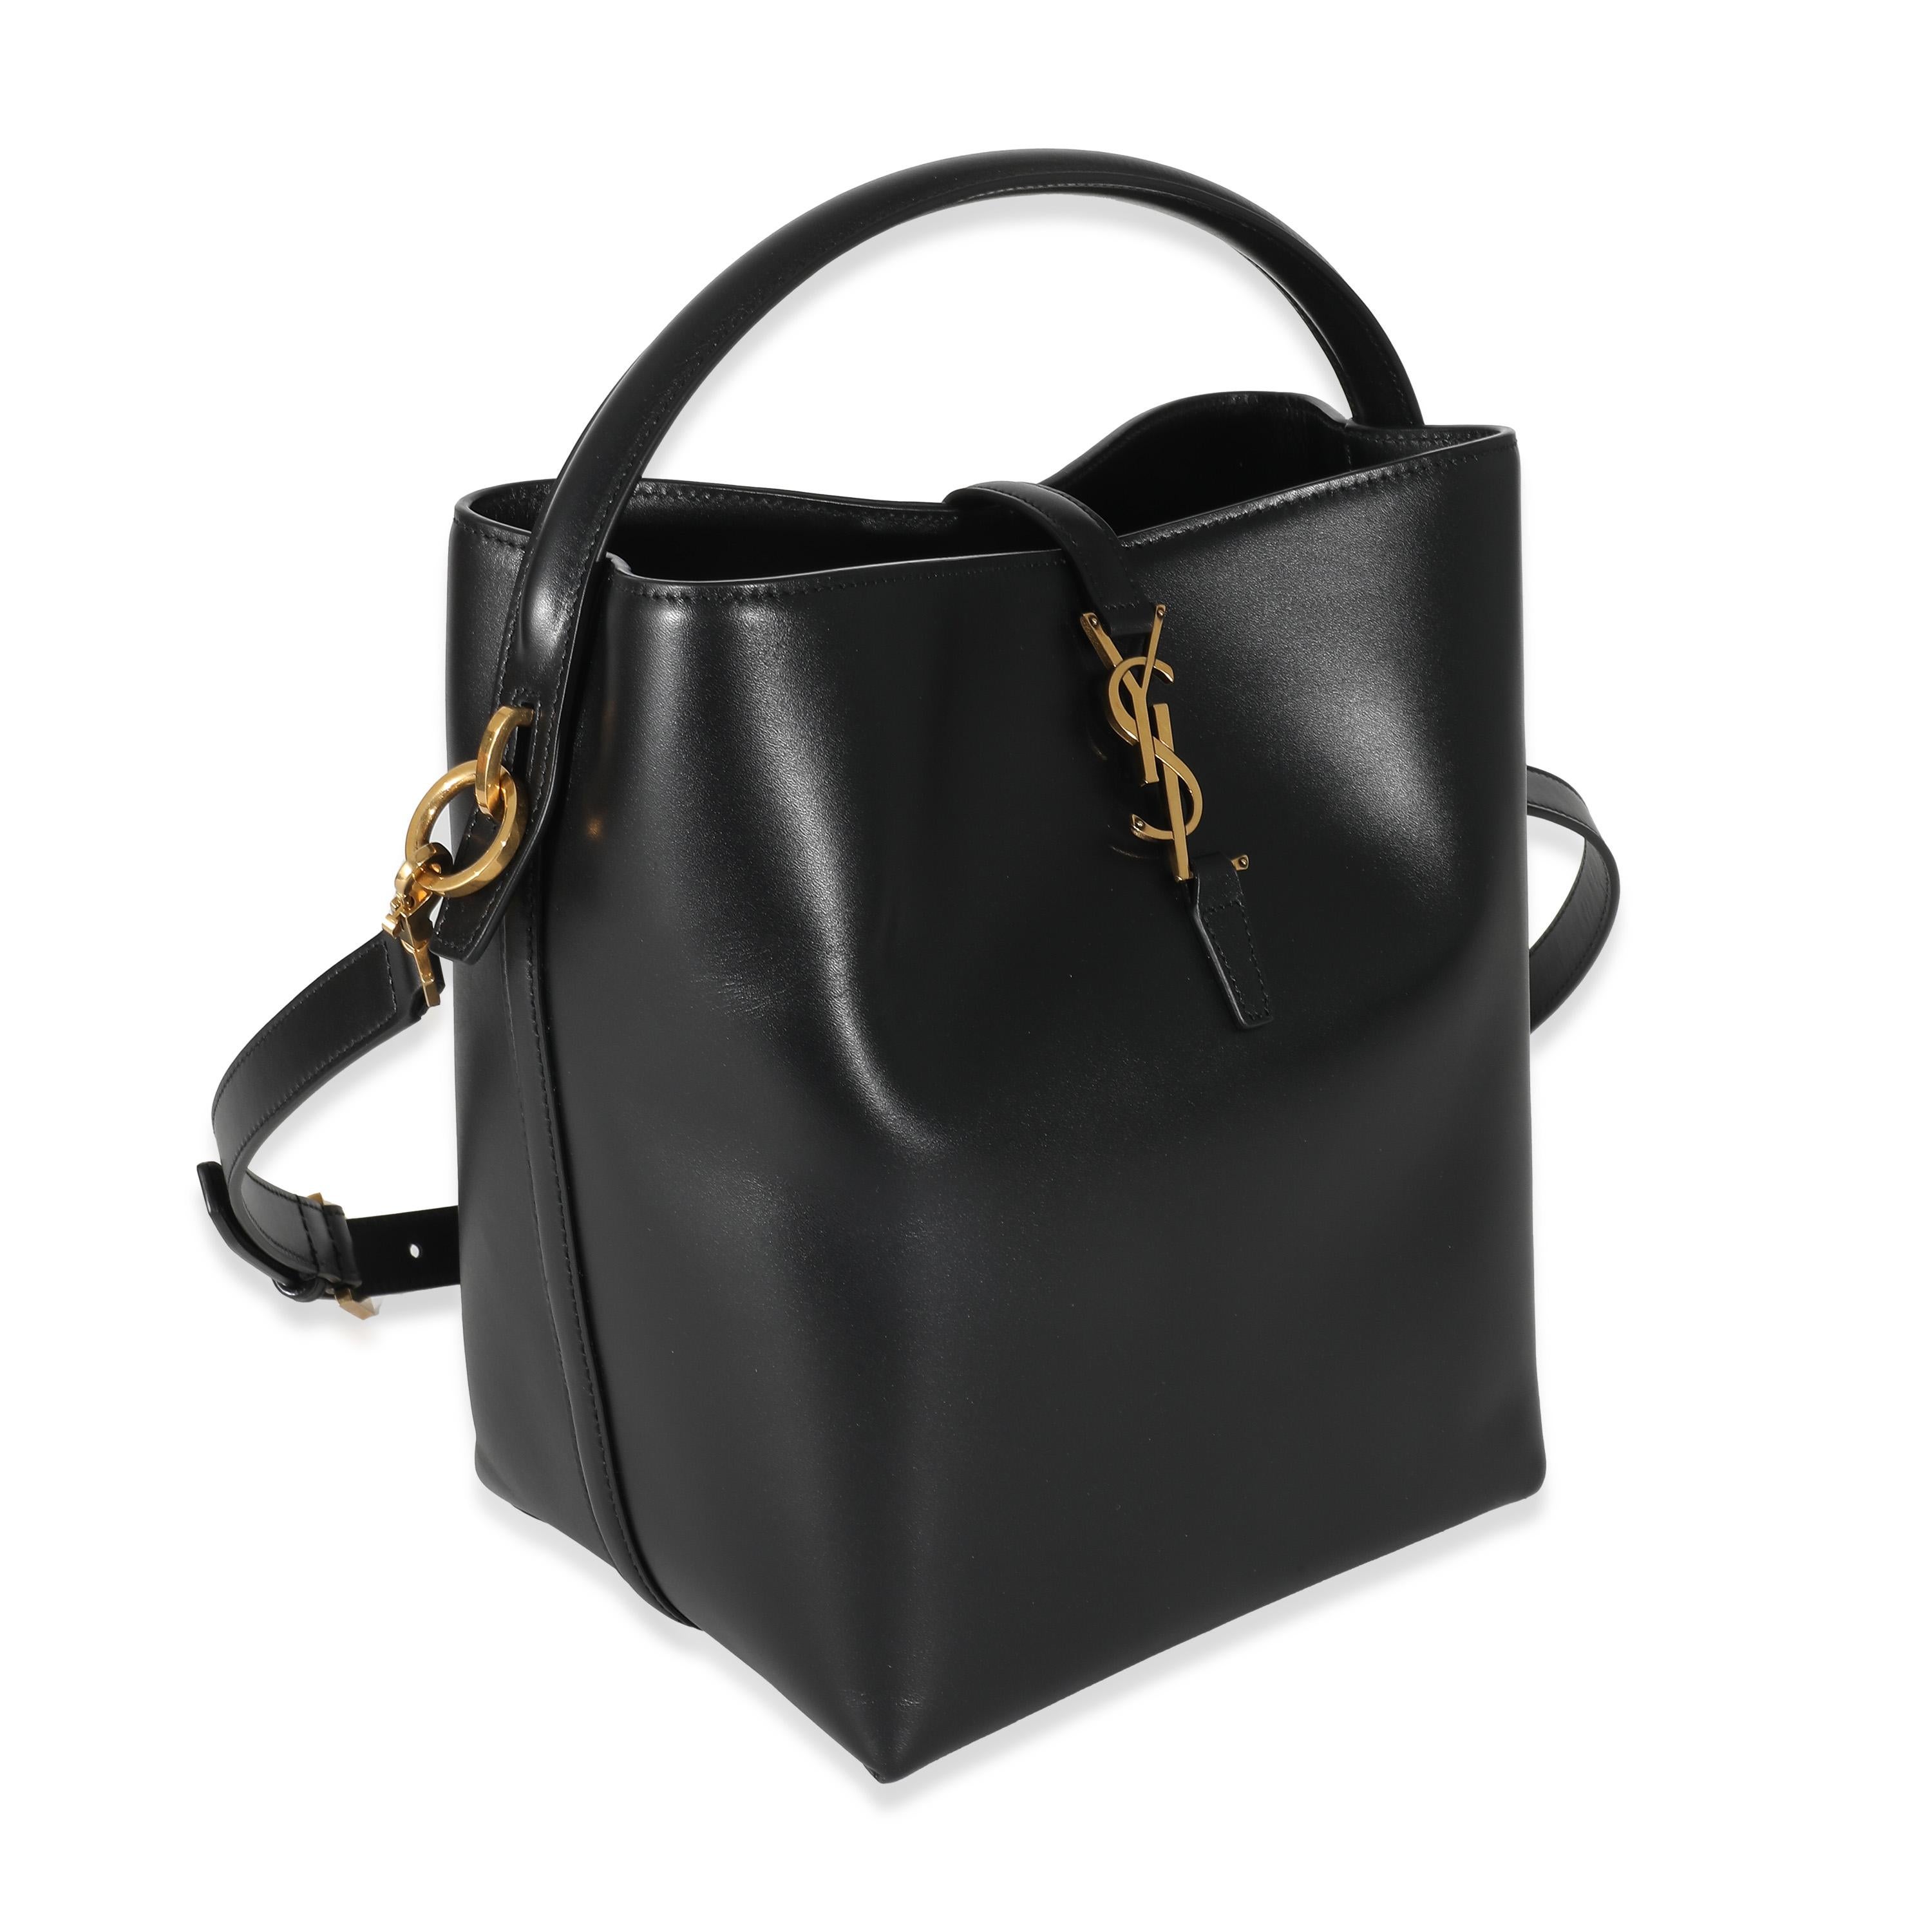 Listing Title: Saint Laurent Black Shiny Calfskin Le 37 Bucket Bag
SKU: 136952
MSRP: 2990.00 USD

Condition: Pre-owned 
Handbag Condition: Excellent
Condition Comments: Item is in excellent condition and displays light signs of wear. Faint scuffing